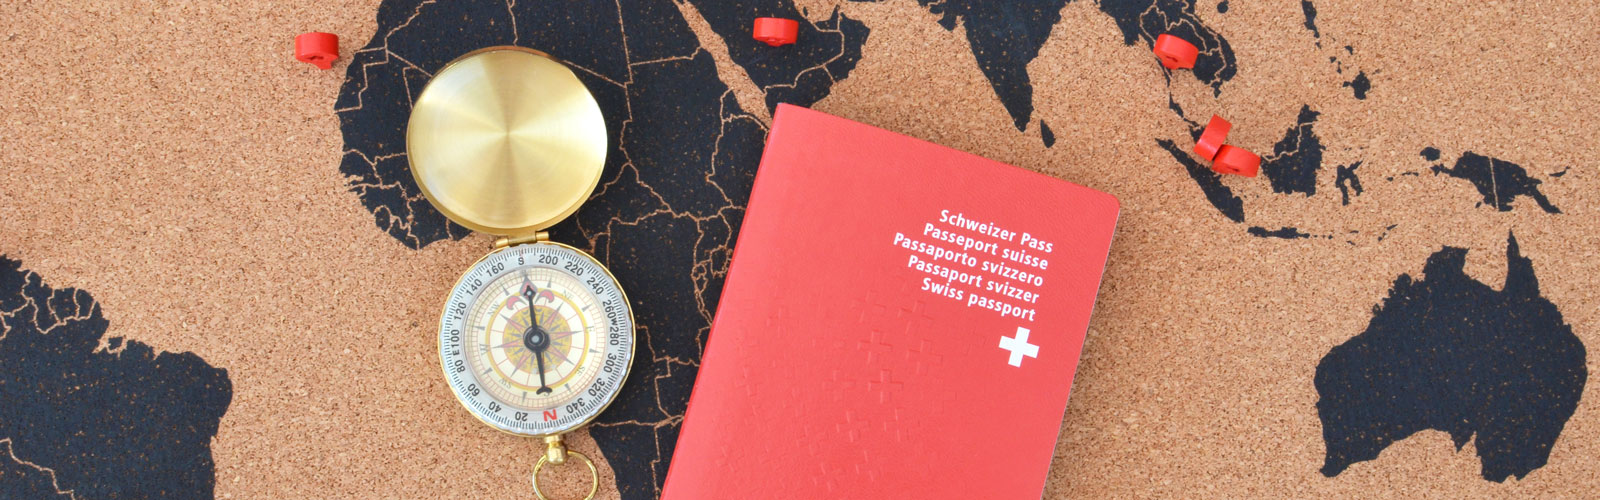 How to get a residency and citizenship in Switzerland: new regulations